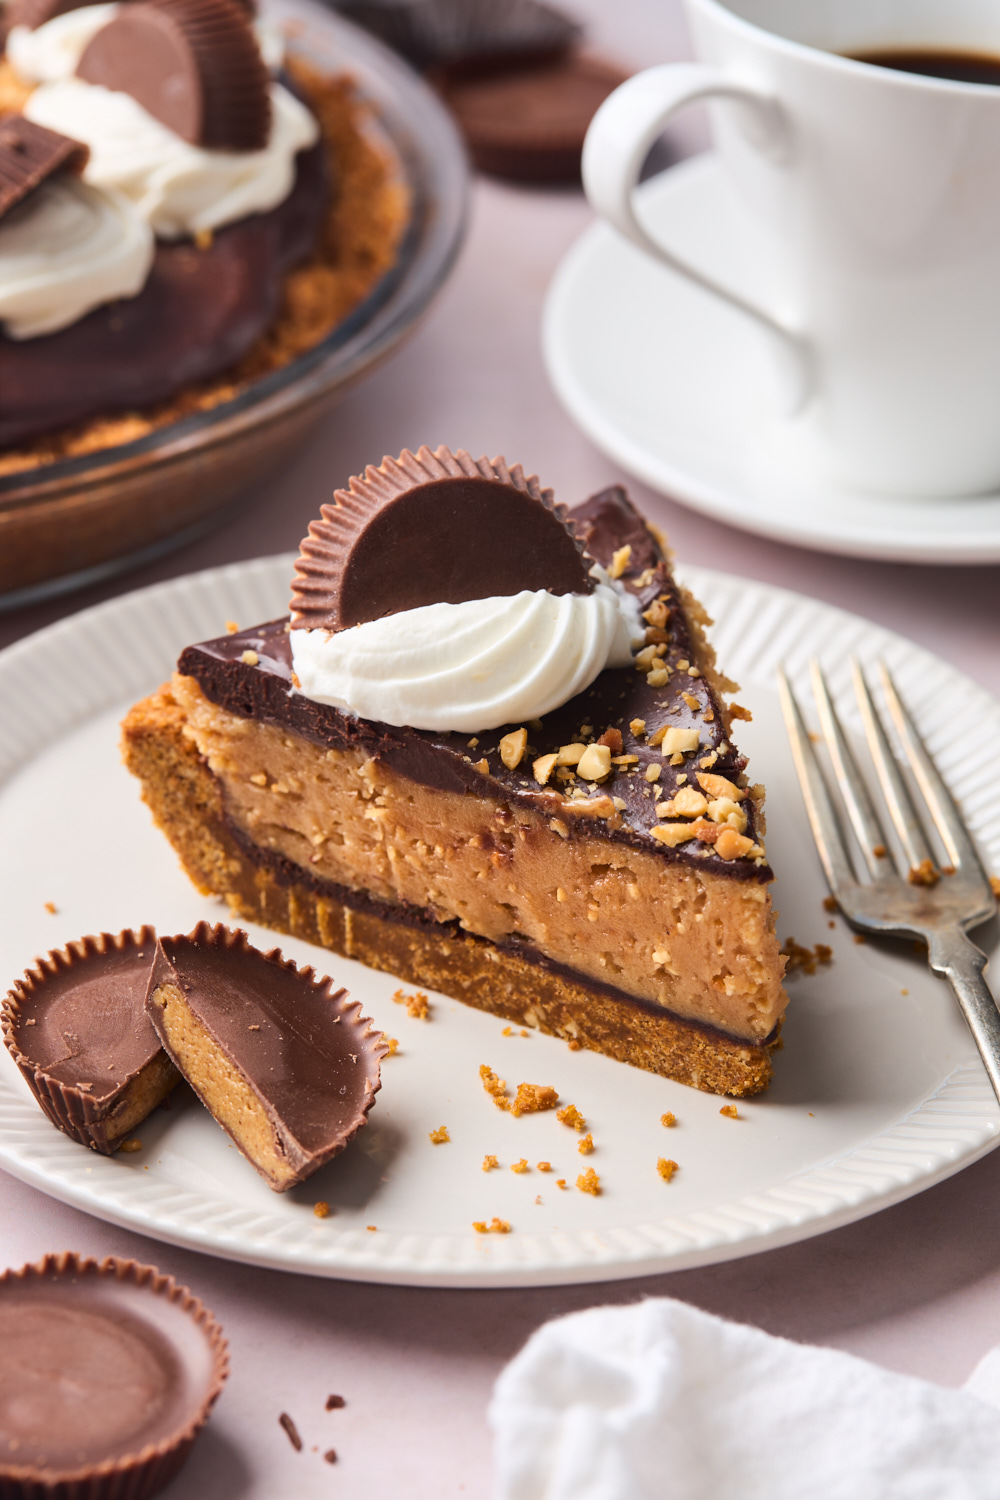 Reese’s Peanut Butter Cup Pie